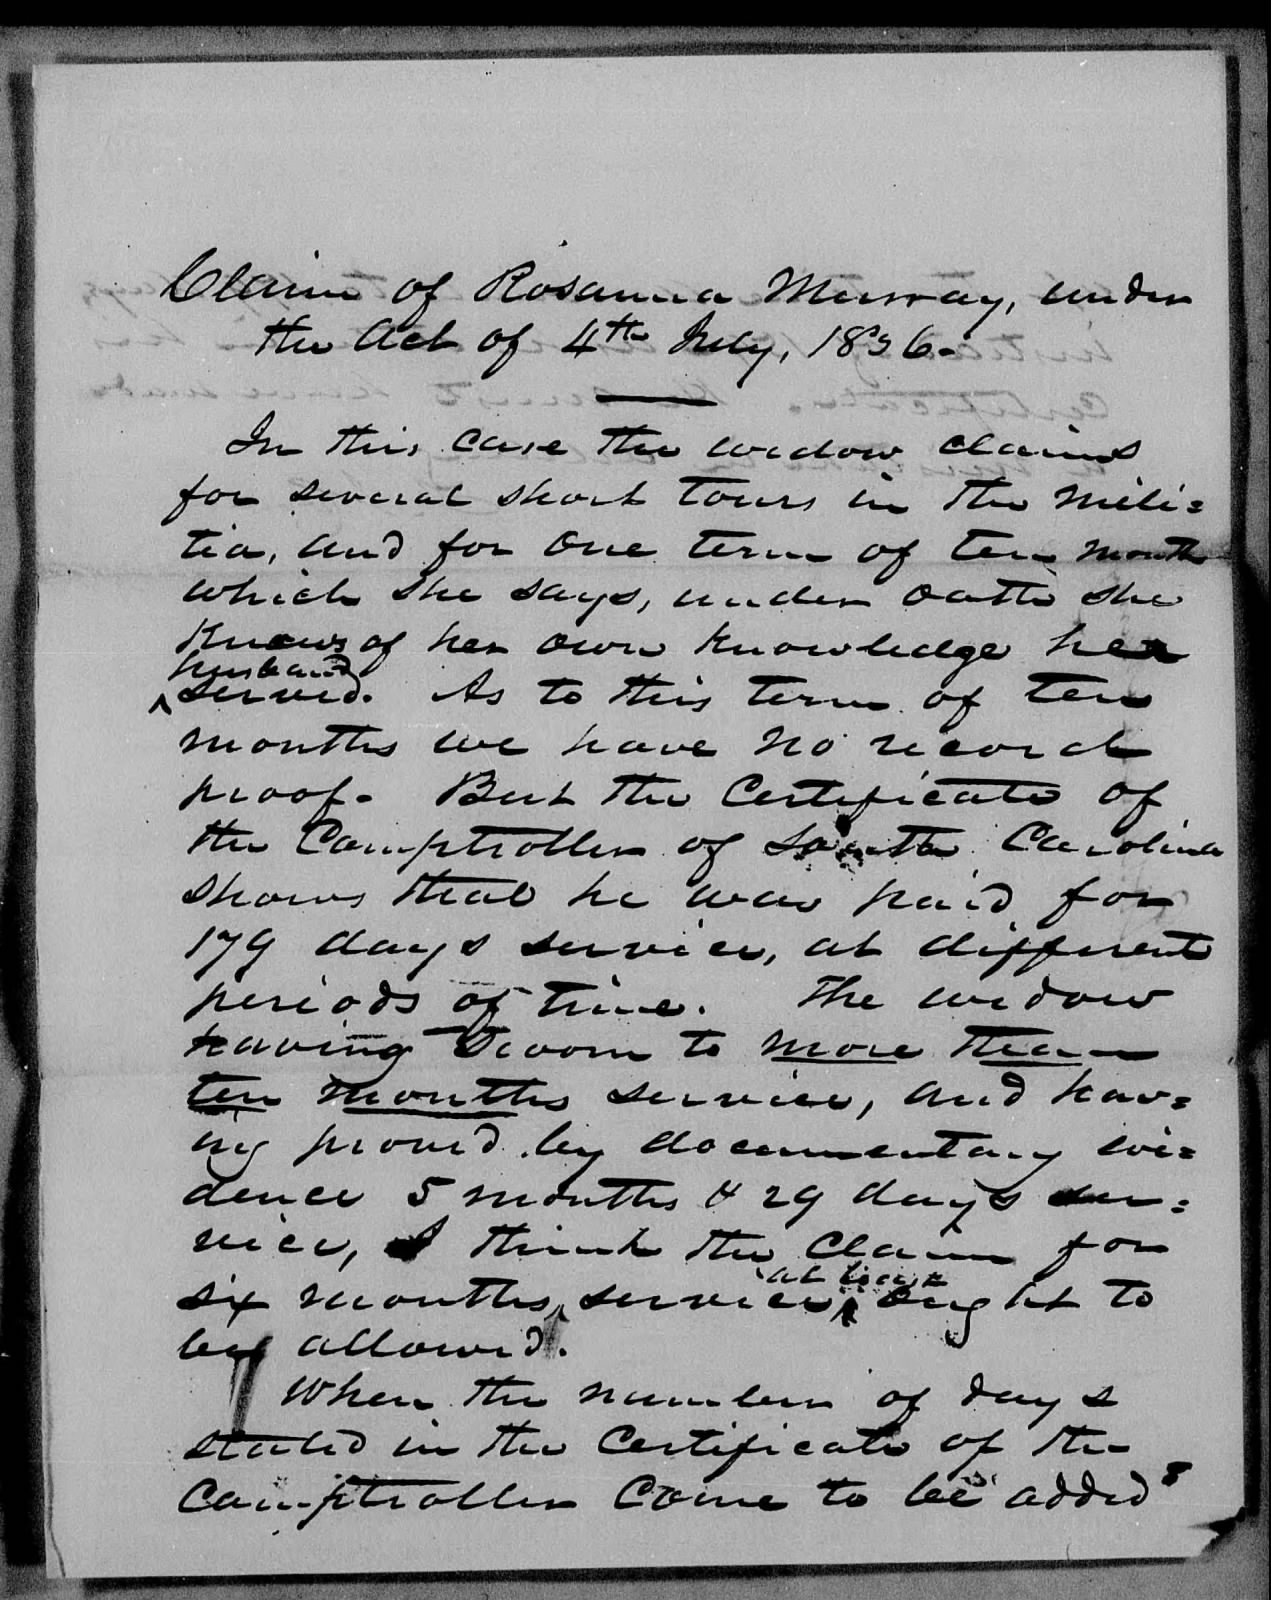 Report of the Pension of Susana Murray from J. J. Combs, circa December 1849, page 1